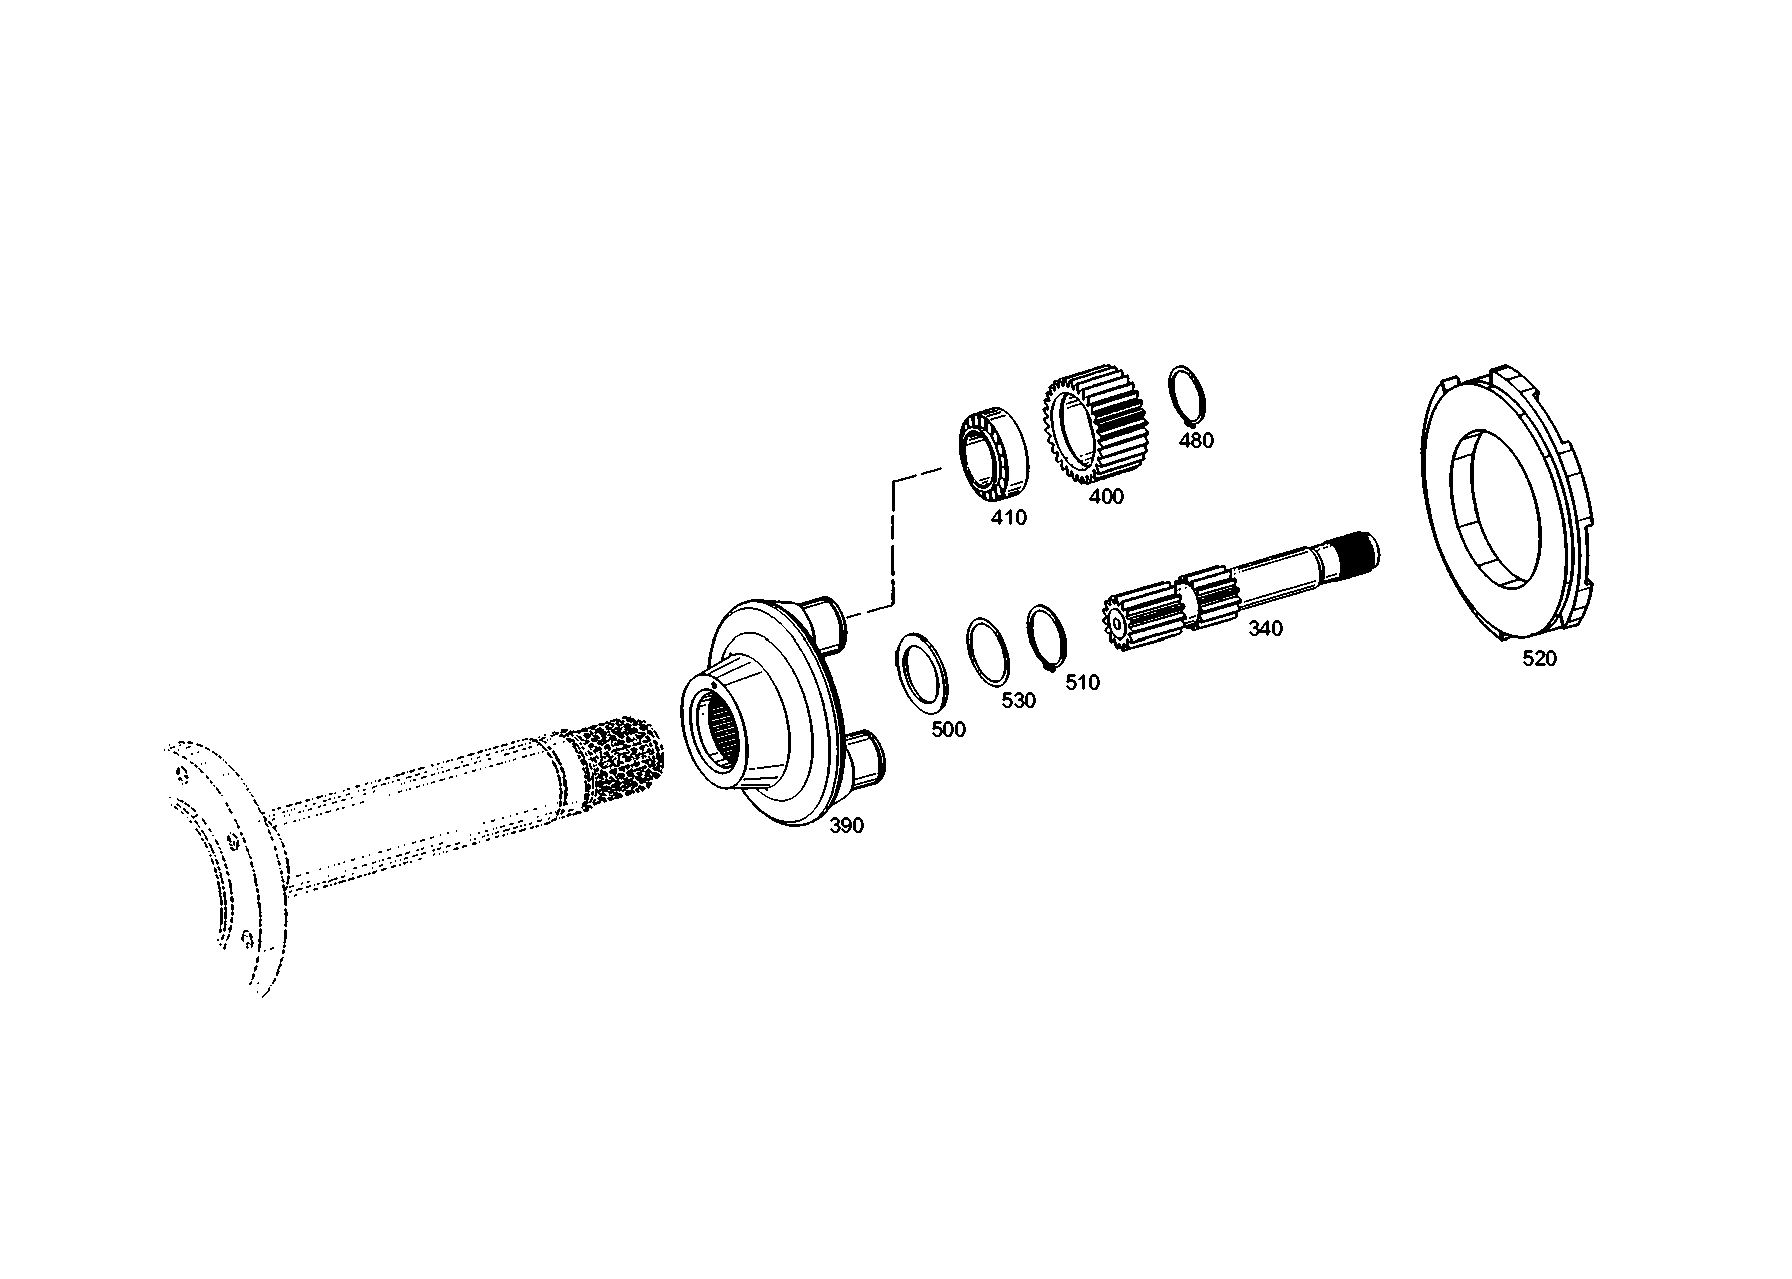 drawing for HAMM AG 1282379 - WASHER (figure 4)